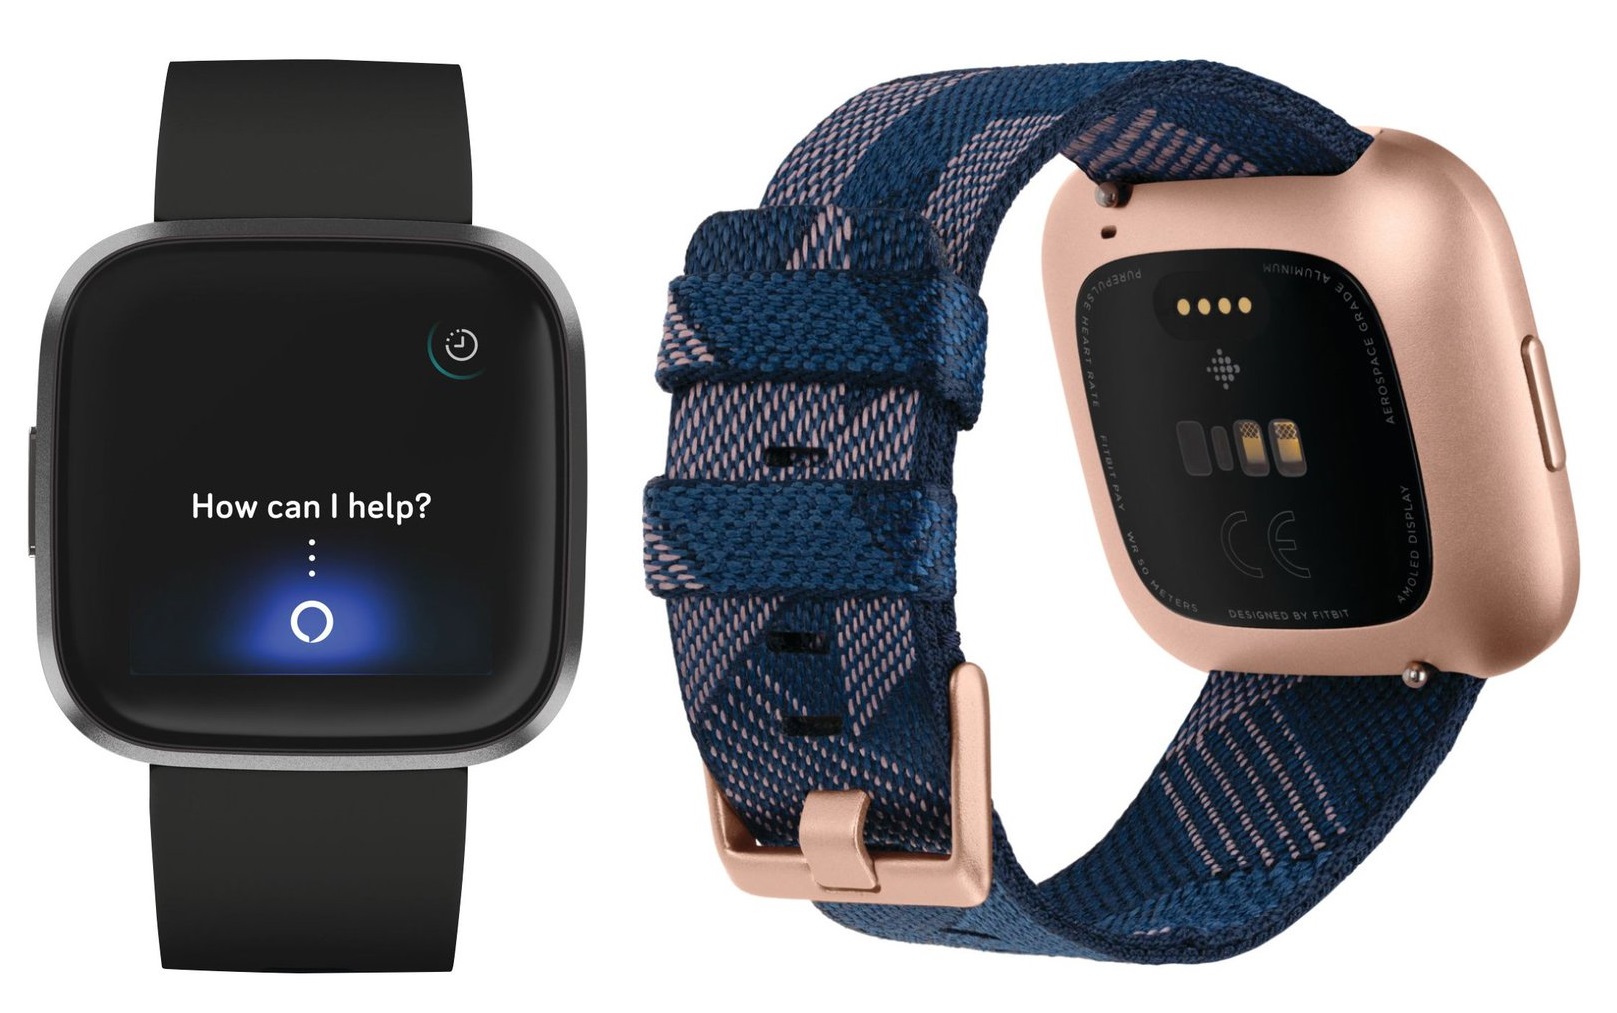 New Fitbit Versa Smartwatch renders showing two units side-by-side. 